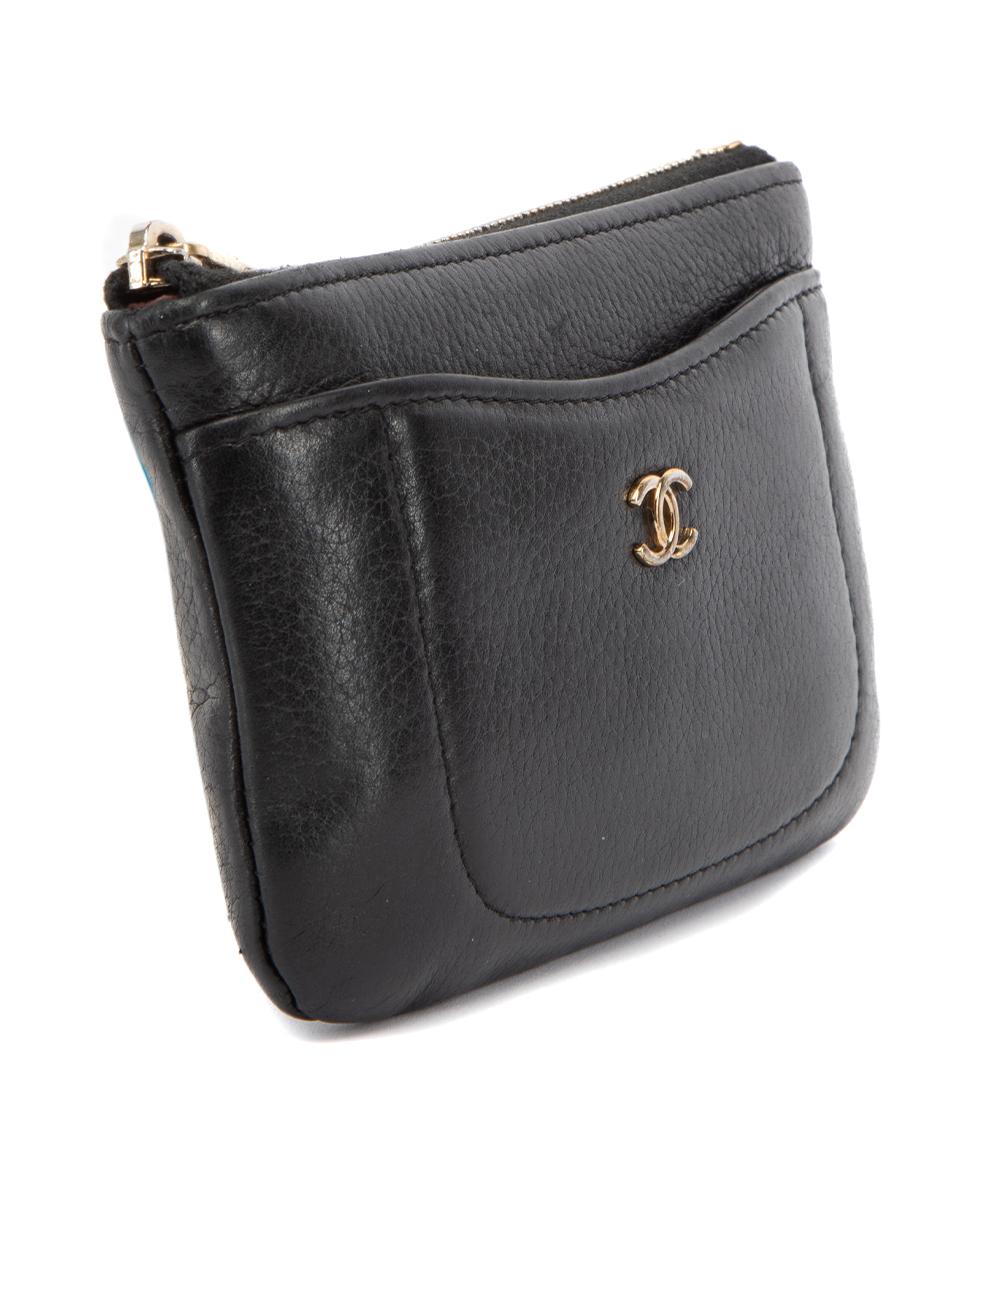 CONDITION is Very good. Minimal wear to purse is evident. Minimal wear to the leather exterior and gold hardware which is discoloured and scuffed, especially at the zipper on this used Chanel designer resale item. This item includes the original